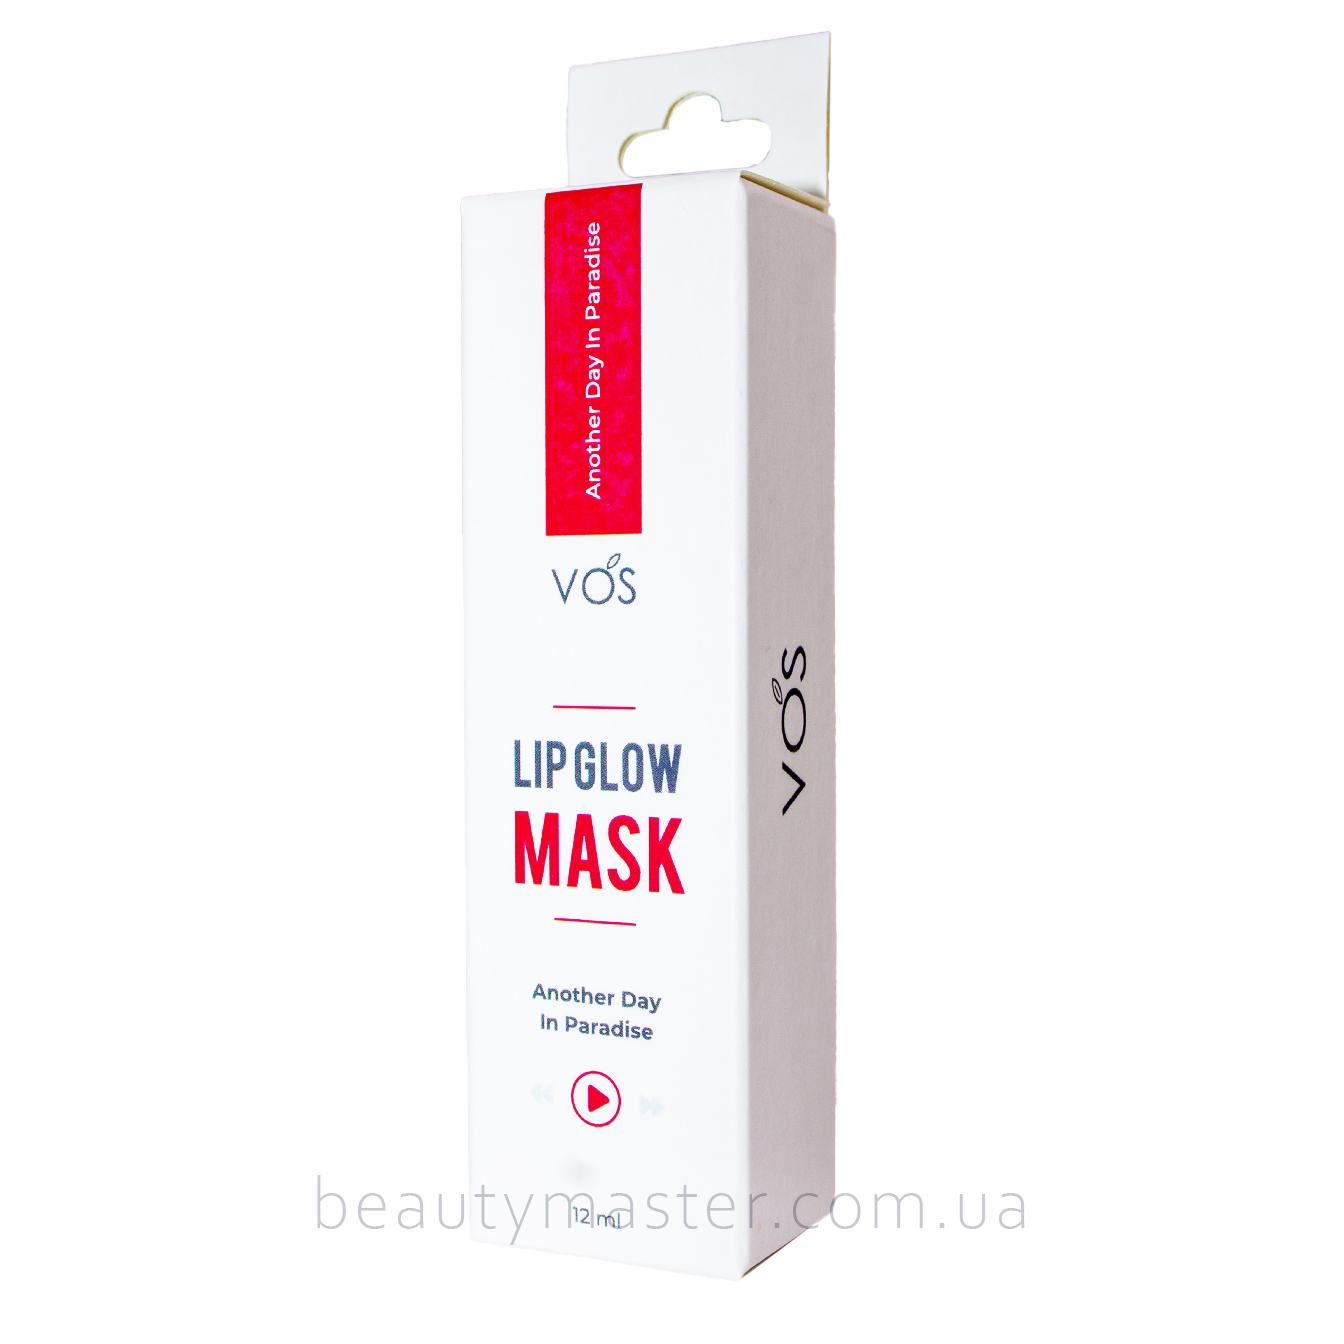 VOS Lip glow Mask another day in paradise 12 мл барбарис